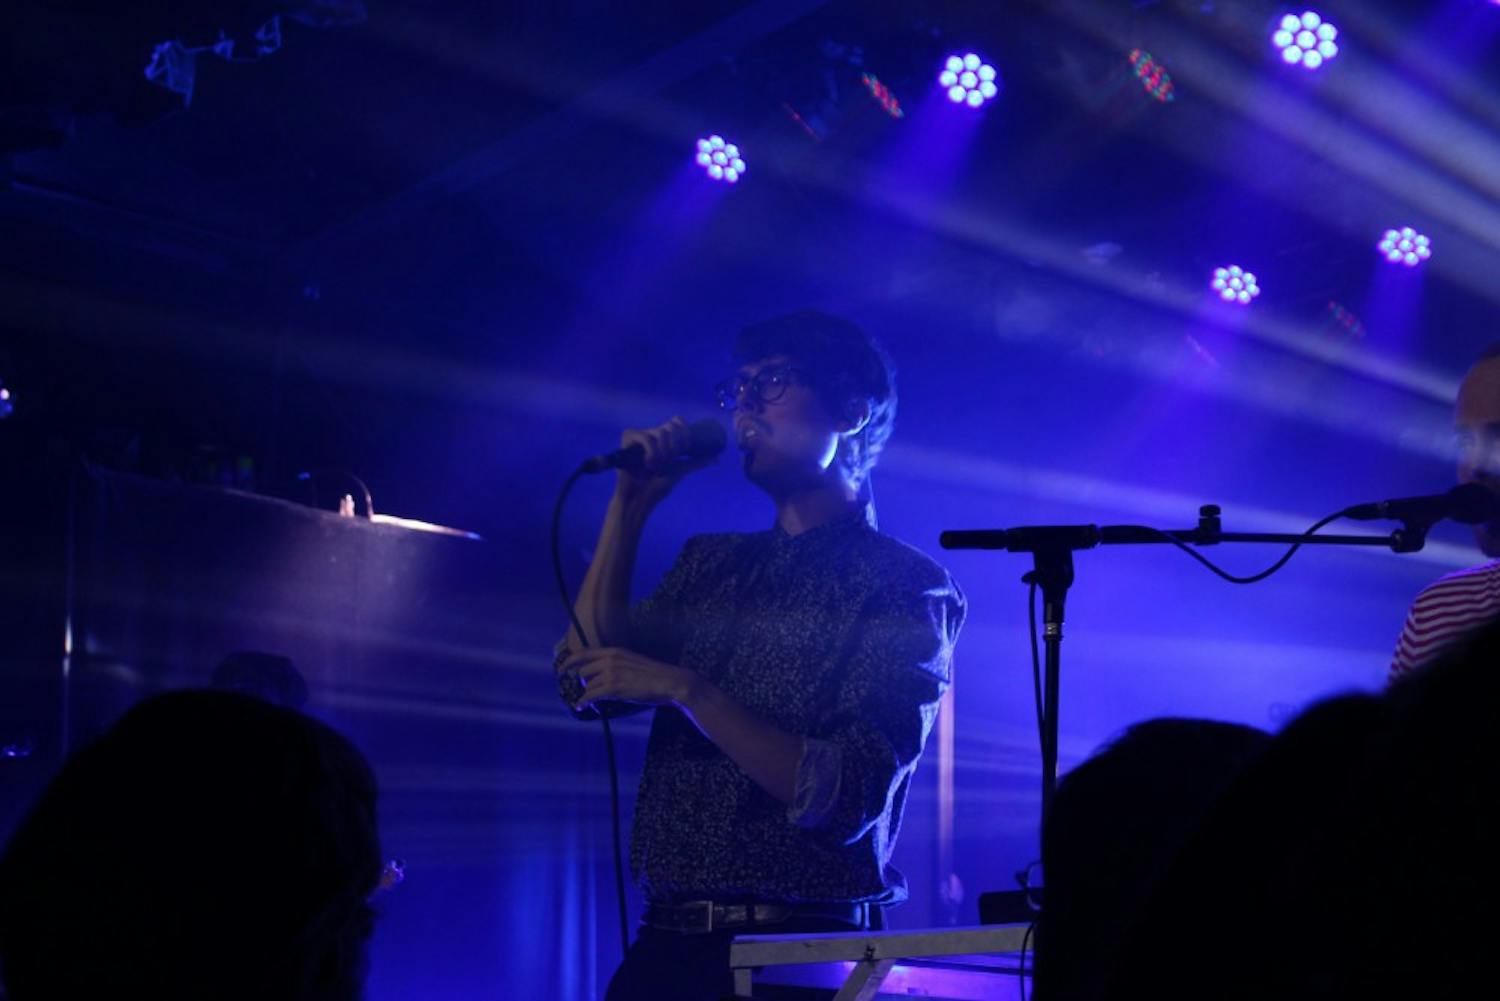 Joywave lead singer&nbsp;Daniel Armbruster had a&nbsp;quirky vibrancy that&nbsp;was clear from the start.